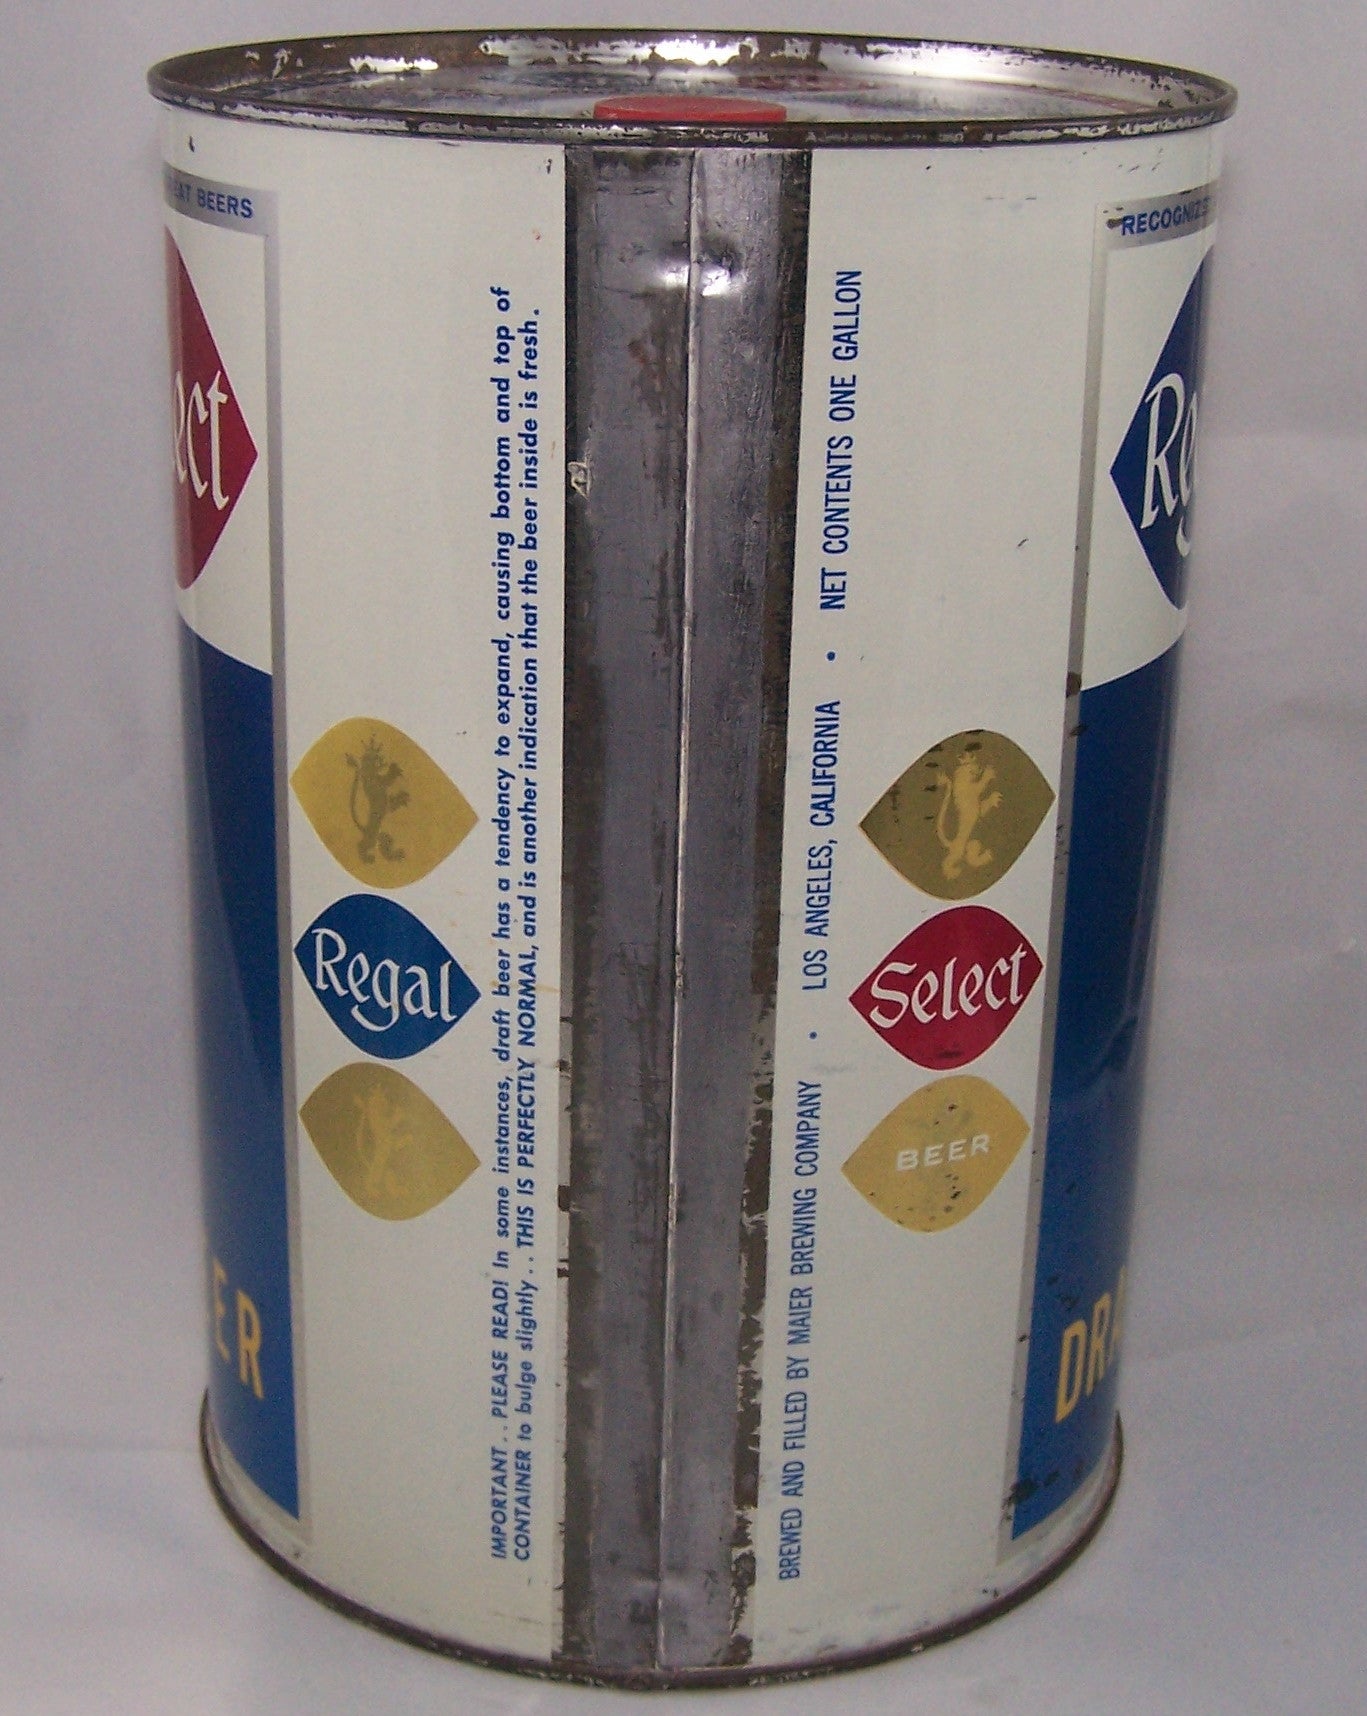 Regal Select Draft Beer, USBC 246-5, Grade 1 to 1/1+ Sold on 01/04/16